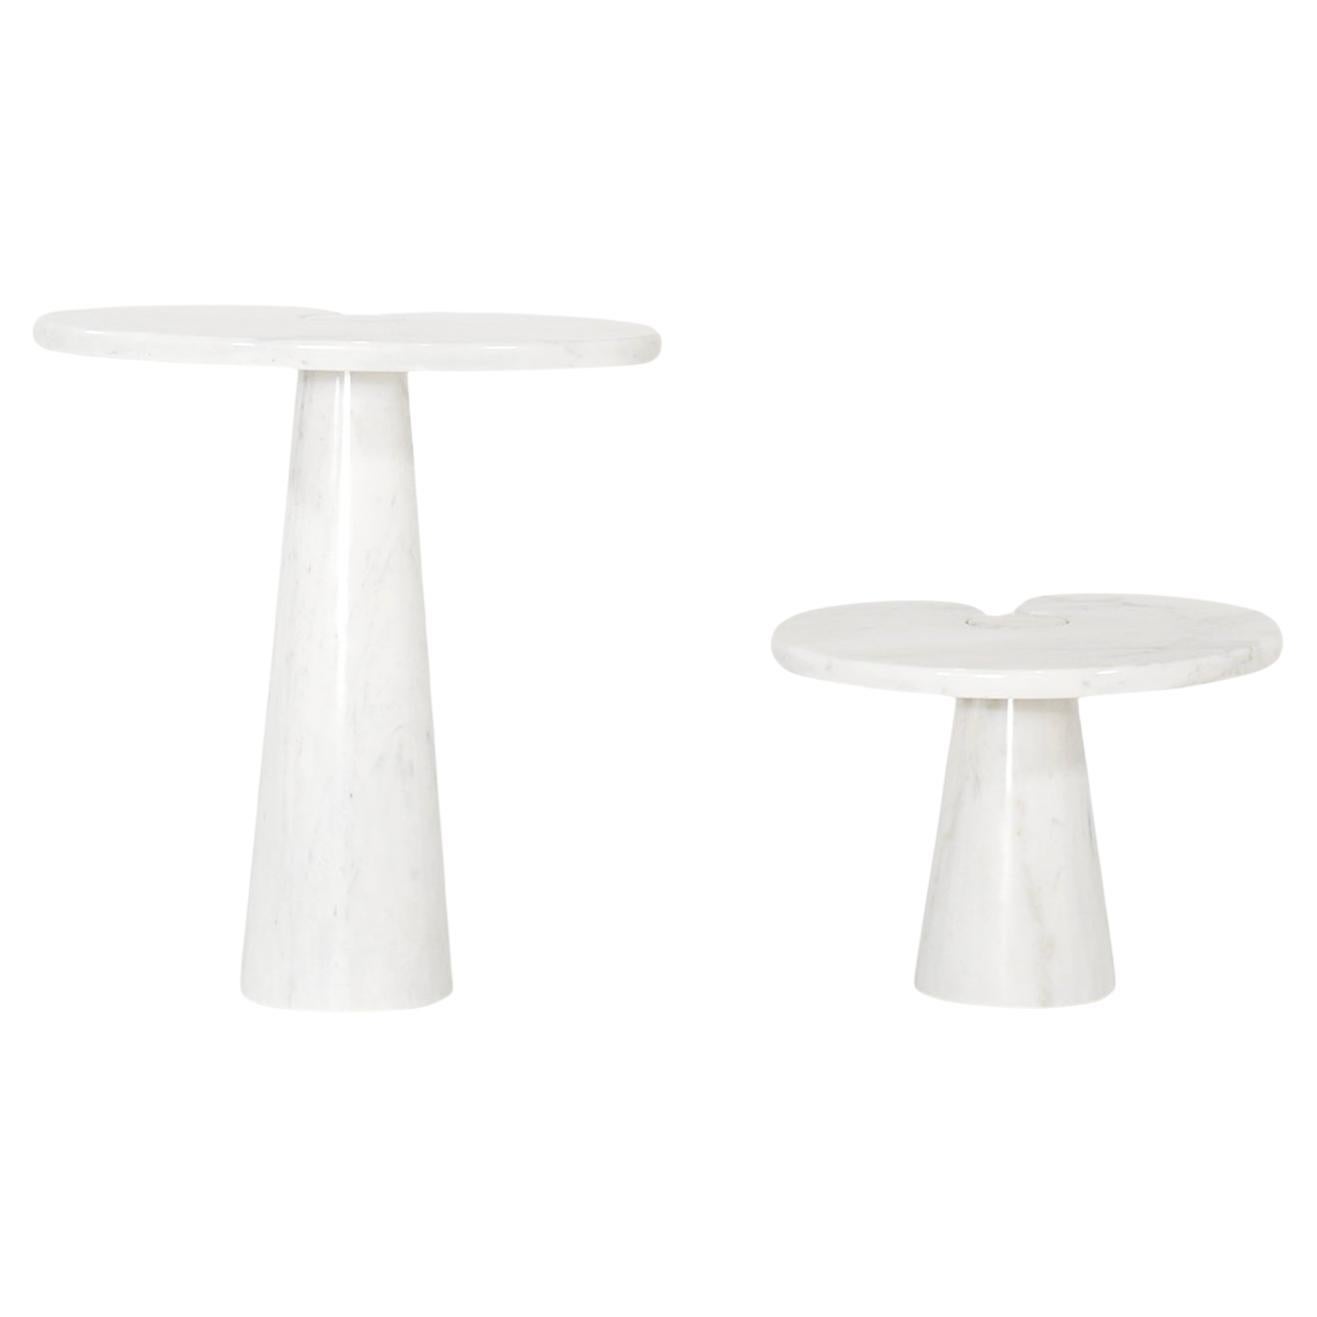 20th Century Italian Pair of Marble Side Tables by Angelo Mangiarotti & Skipper